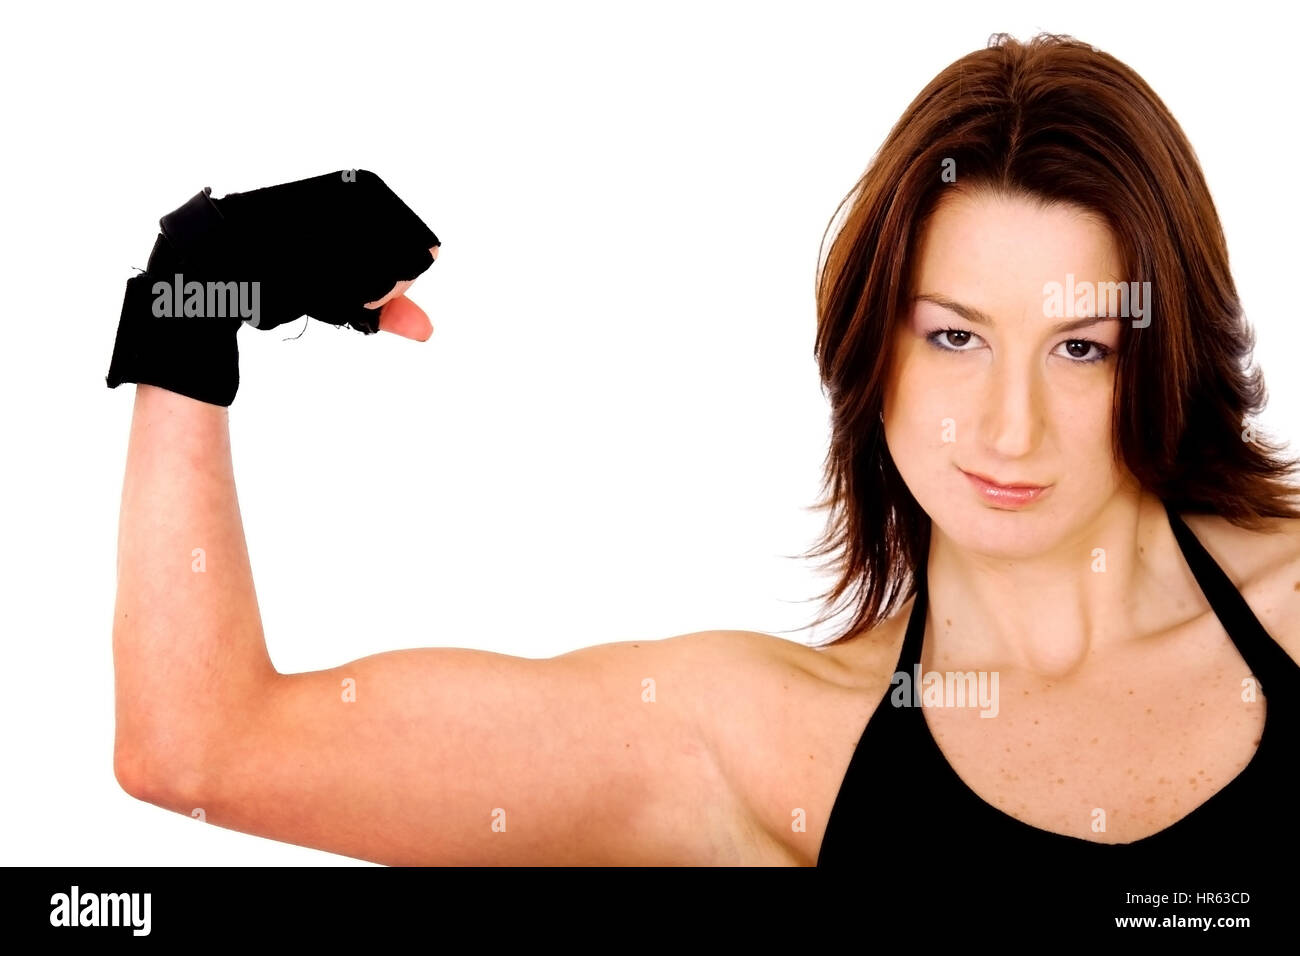 Portrait of young fitness woman shows biceps. Stock Photo by ©kopitin  86236174